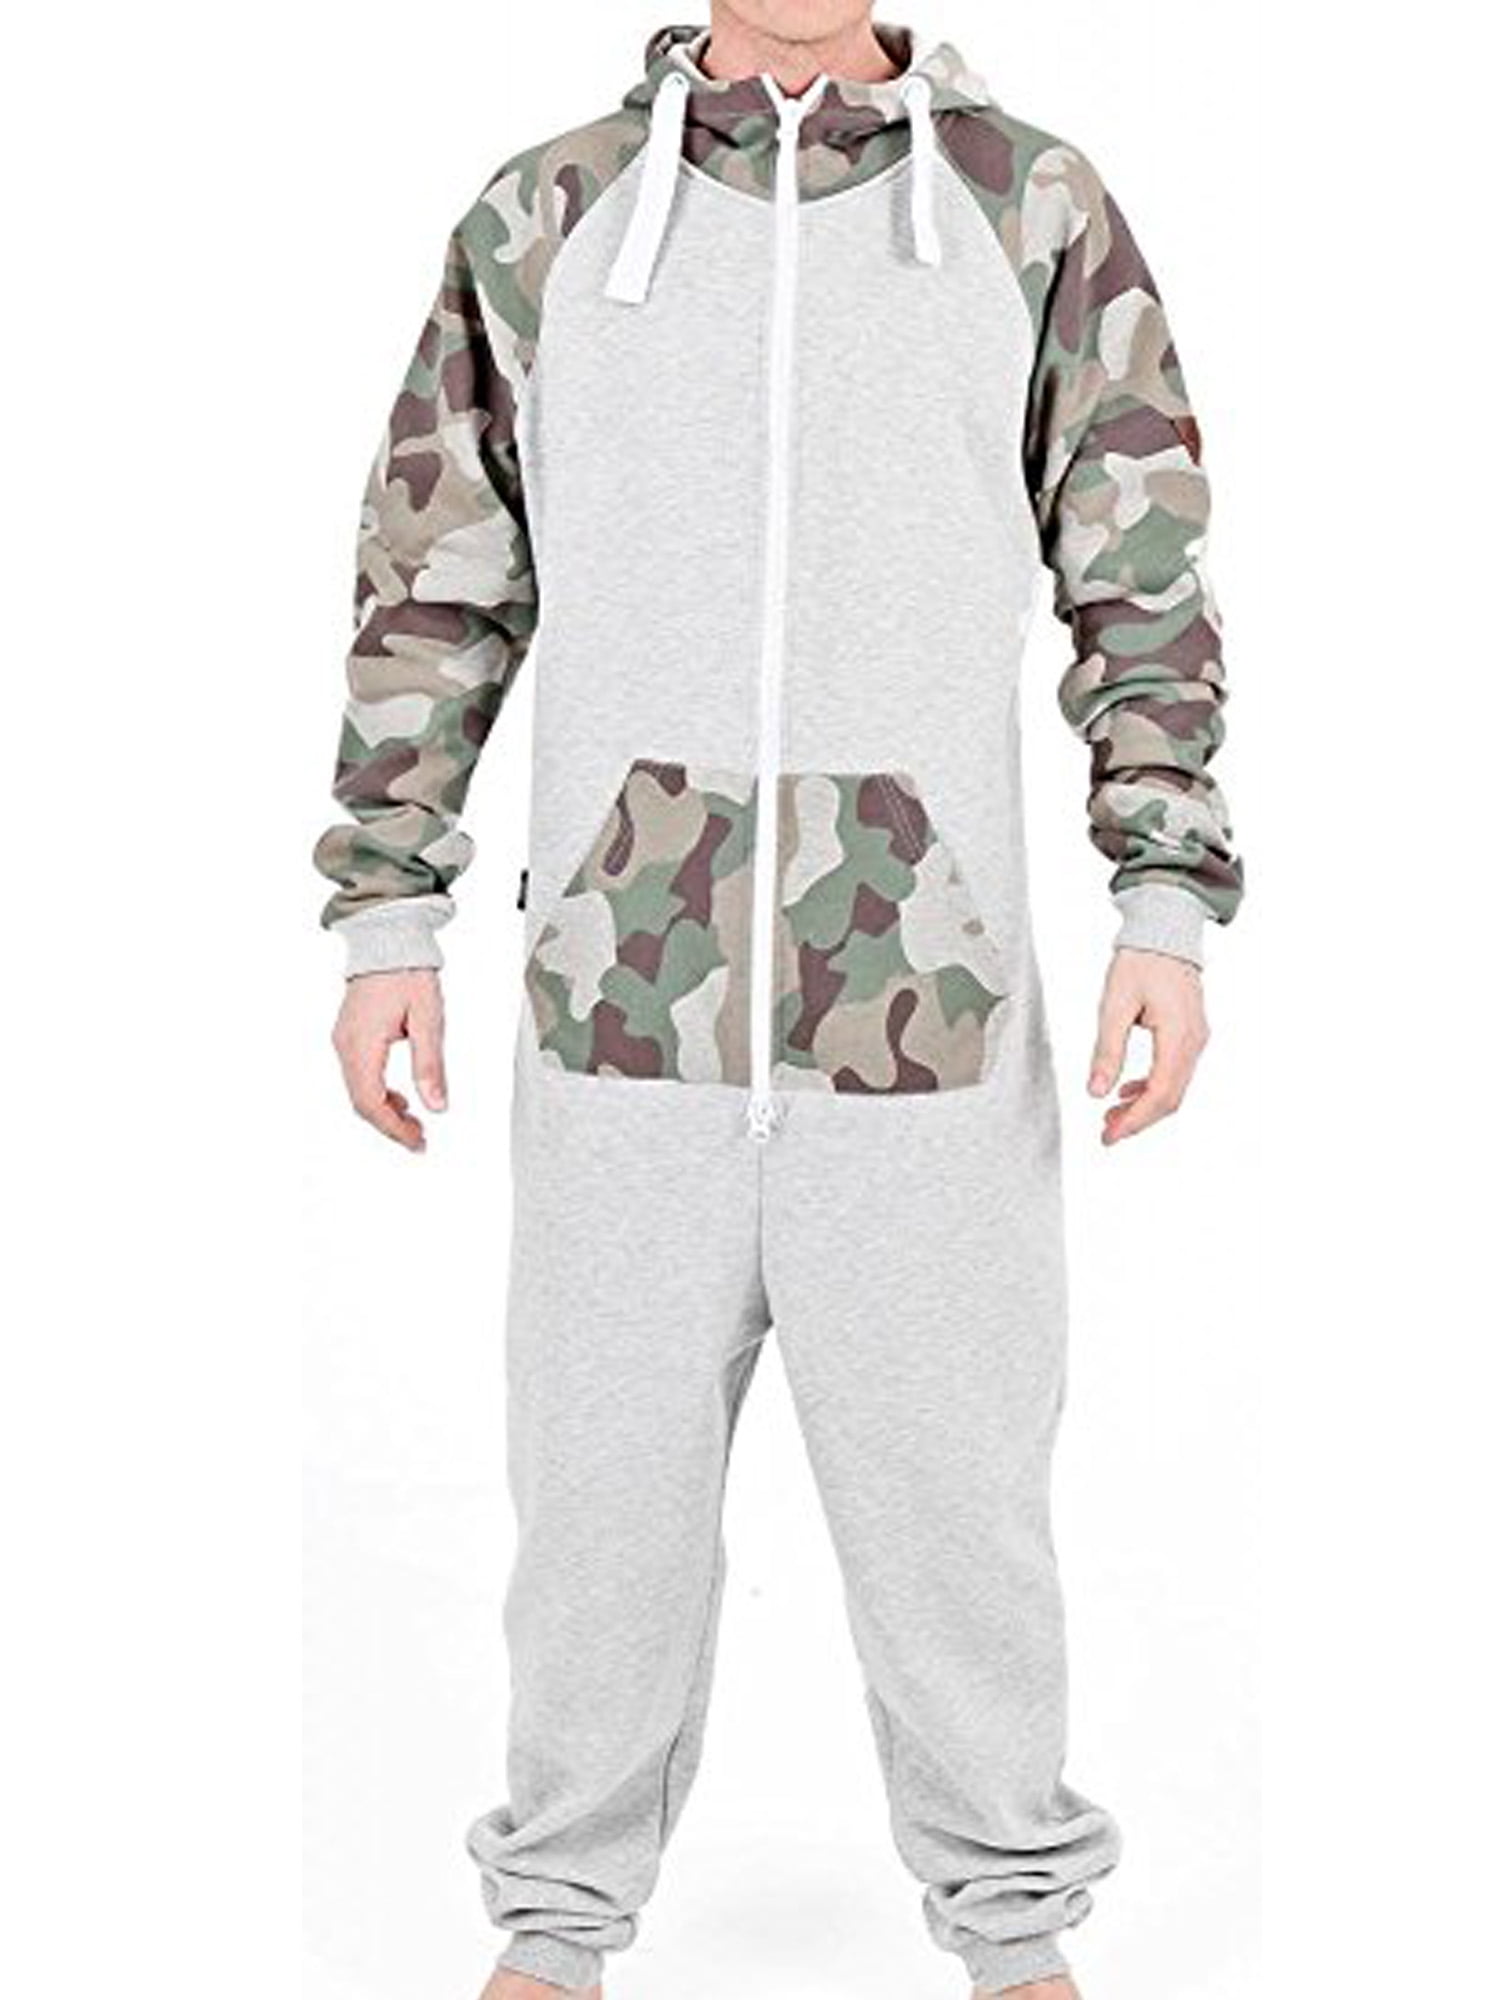 SKYLINEWEARS Mens Fashion Onesie Hooded Jumpsuit One Piece Non Footed Pajamas 